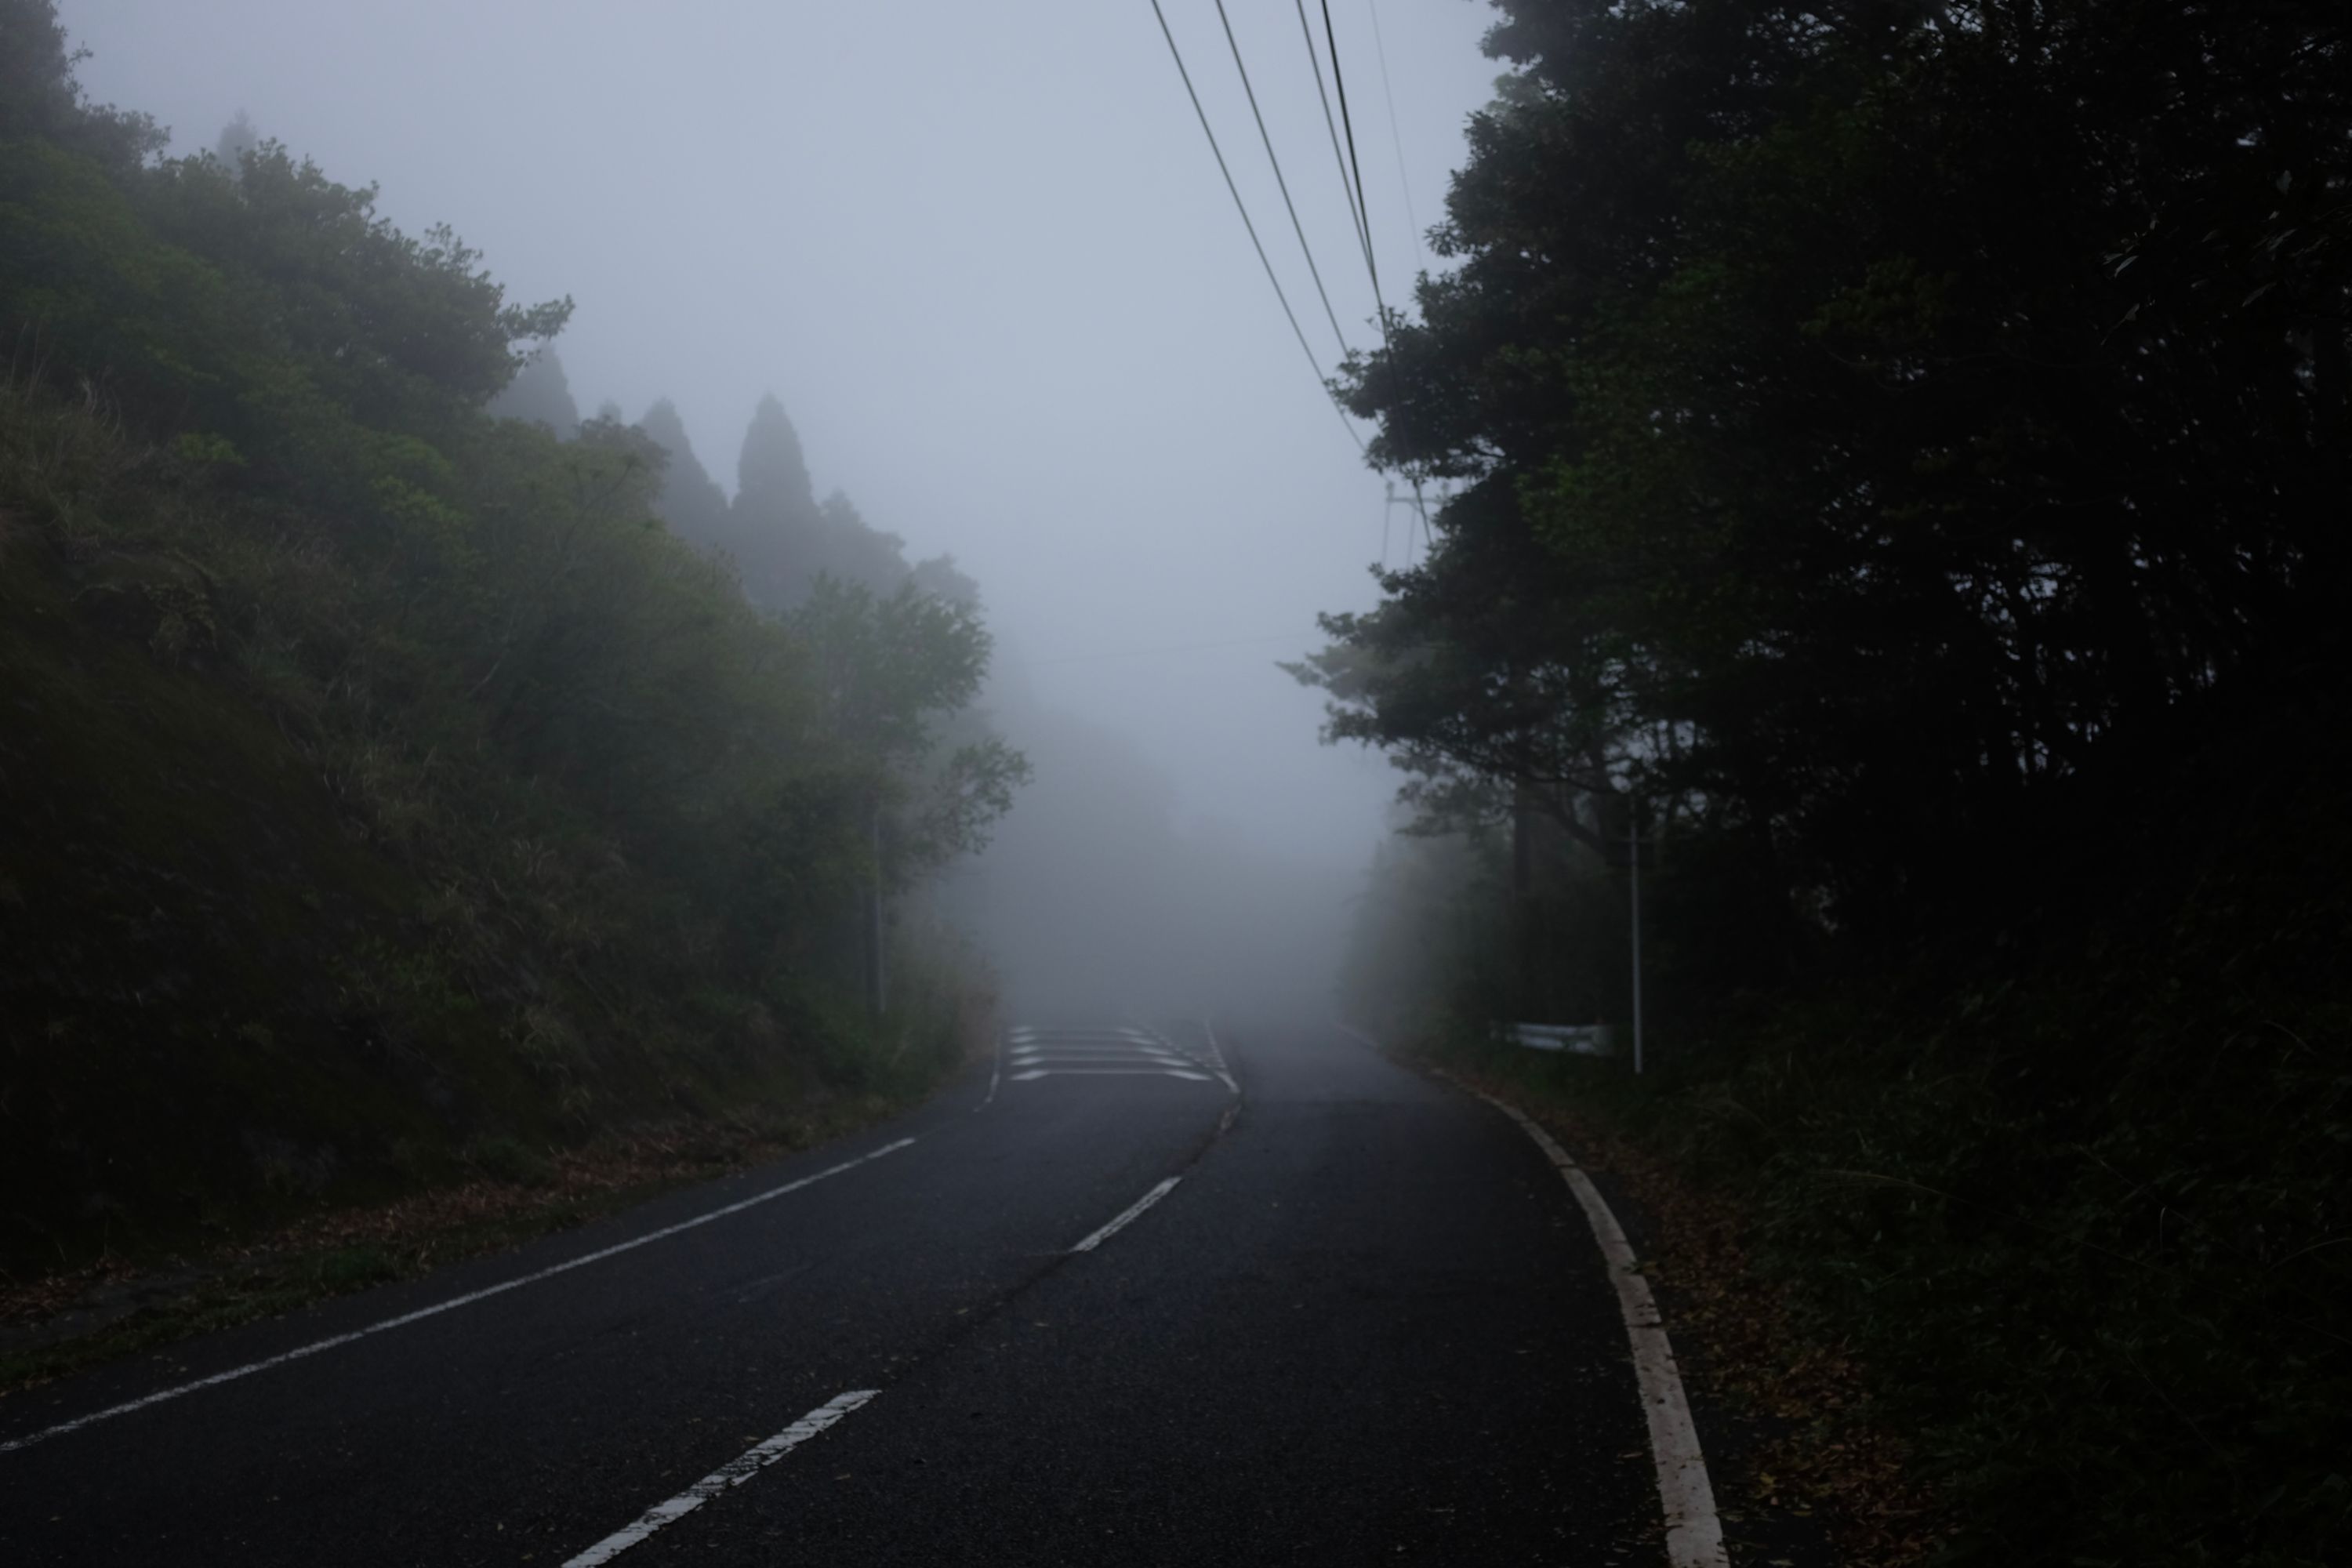 Looking out on a gloomy road half-covered in fog.